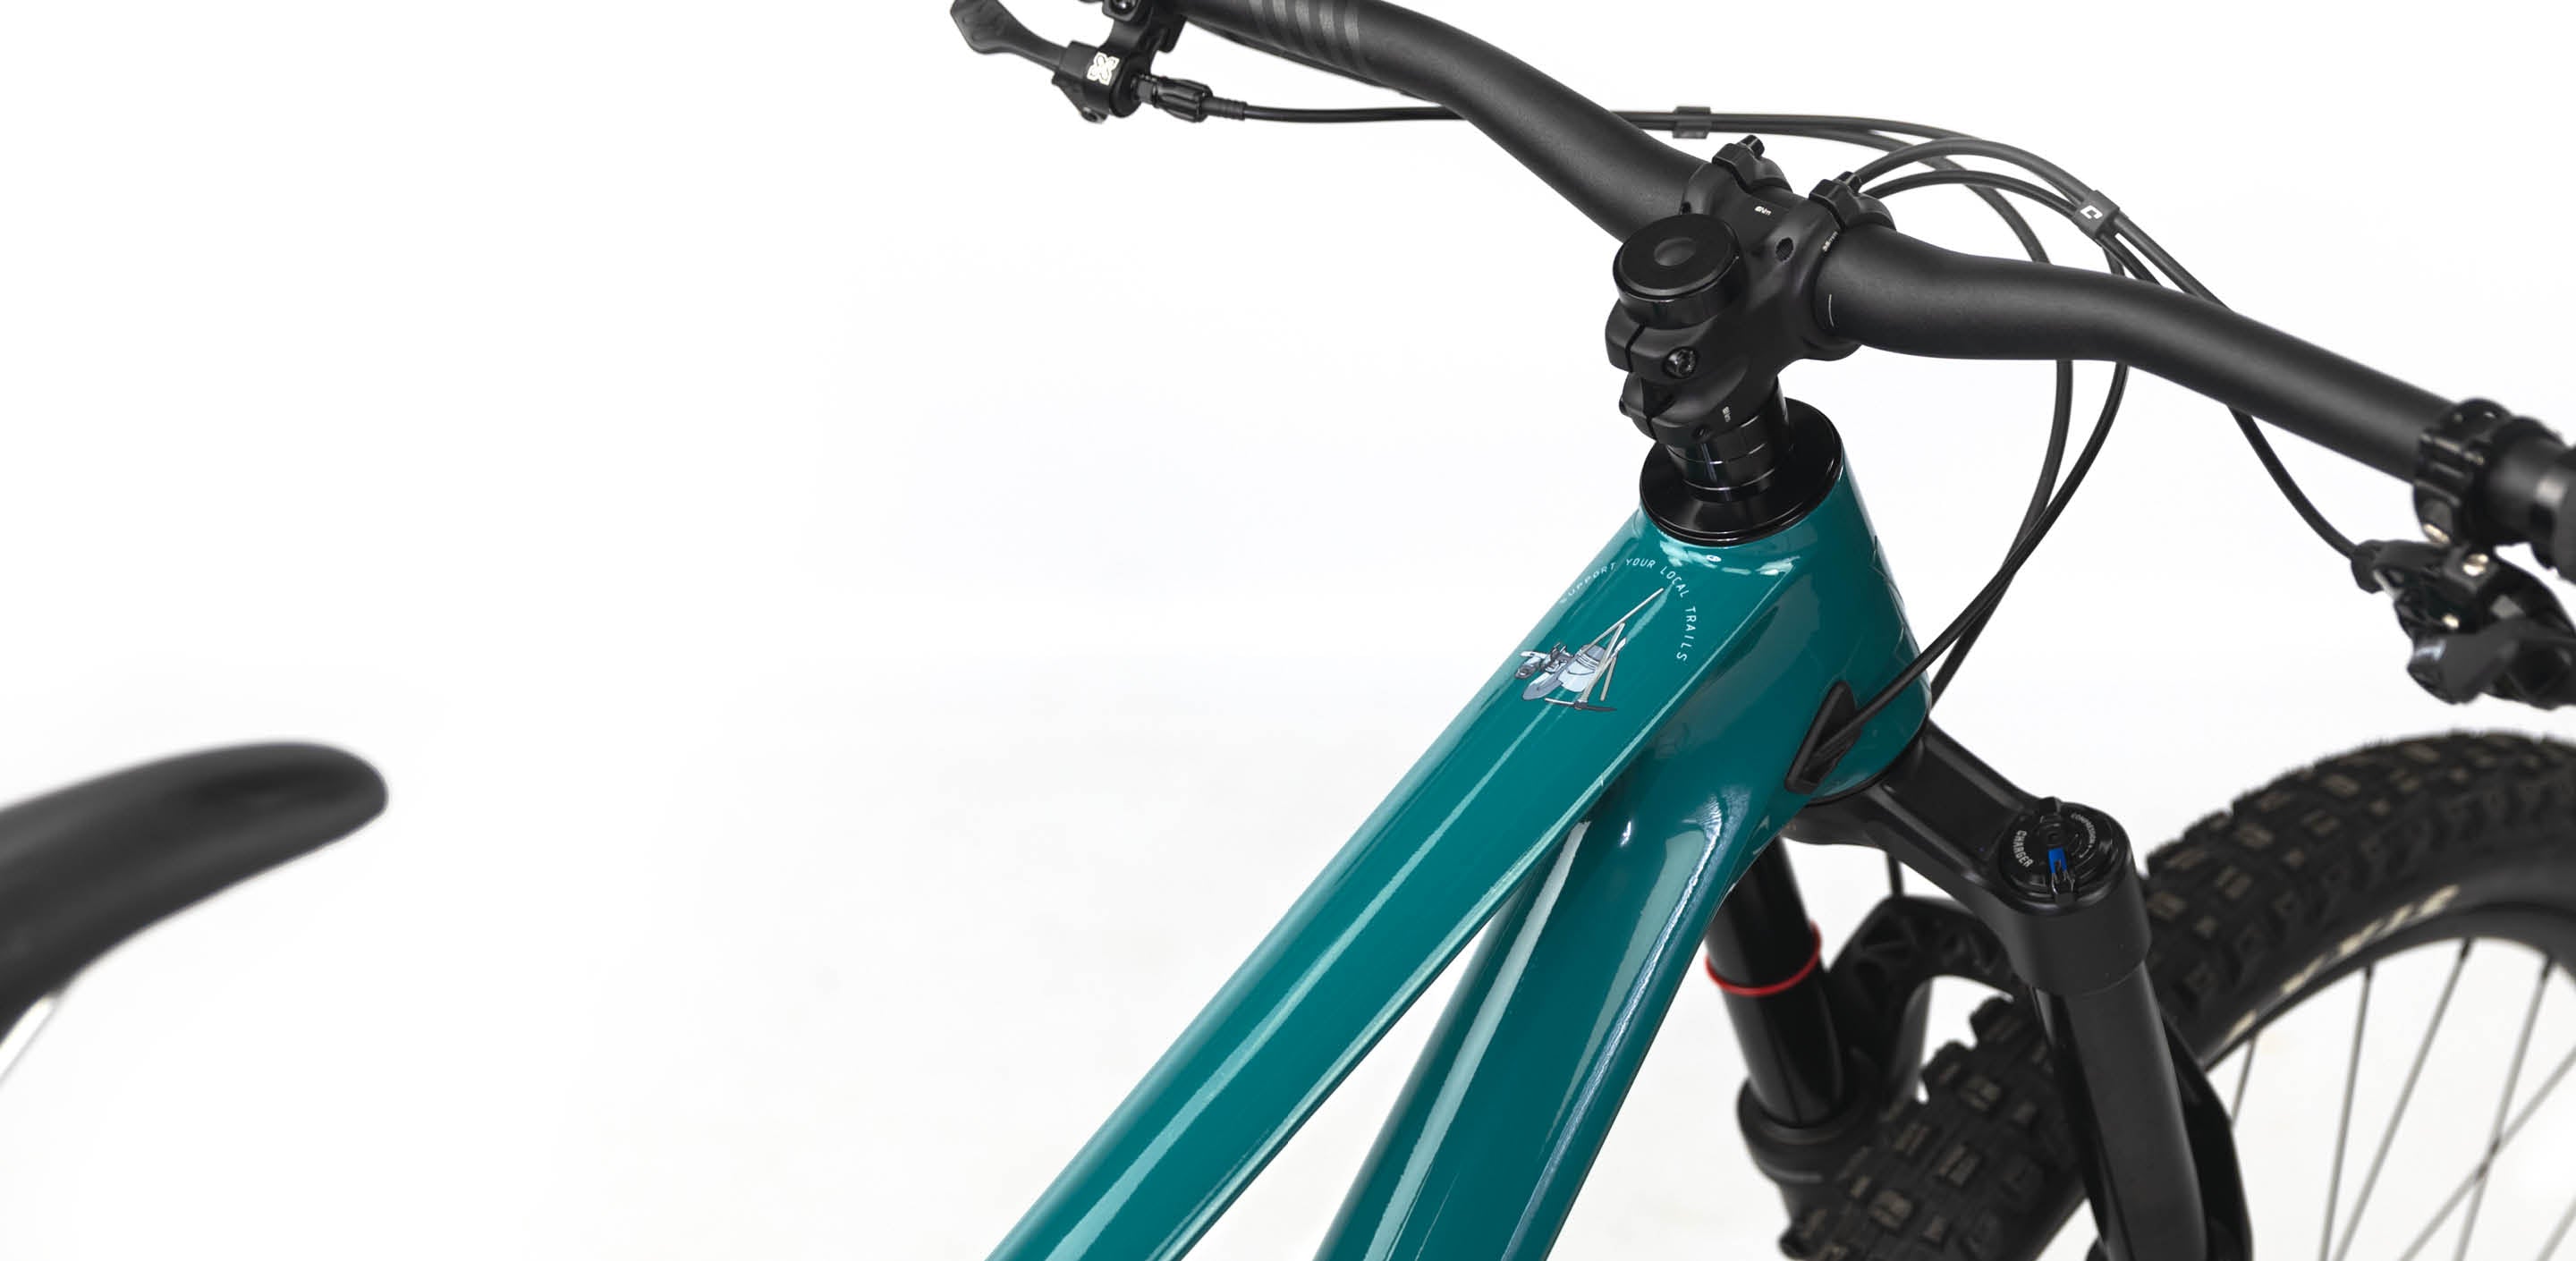 Frame Protector 4060 by Slicy | SCOR | accessories | Parts, Parts | Accessories